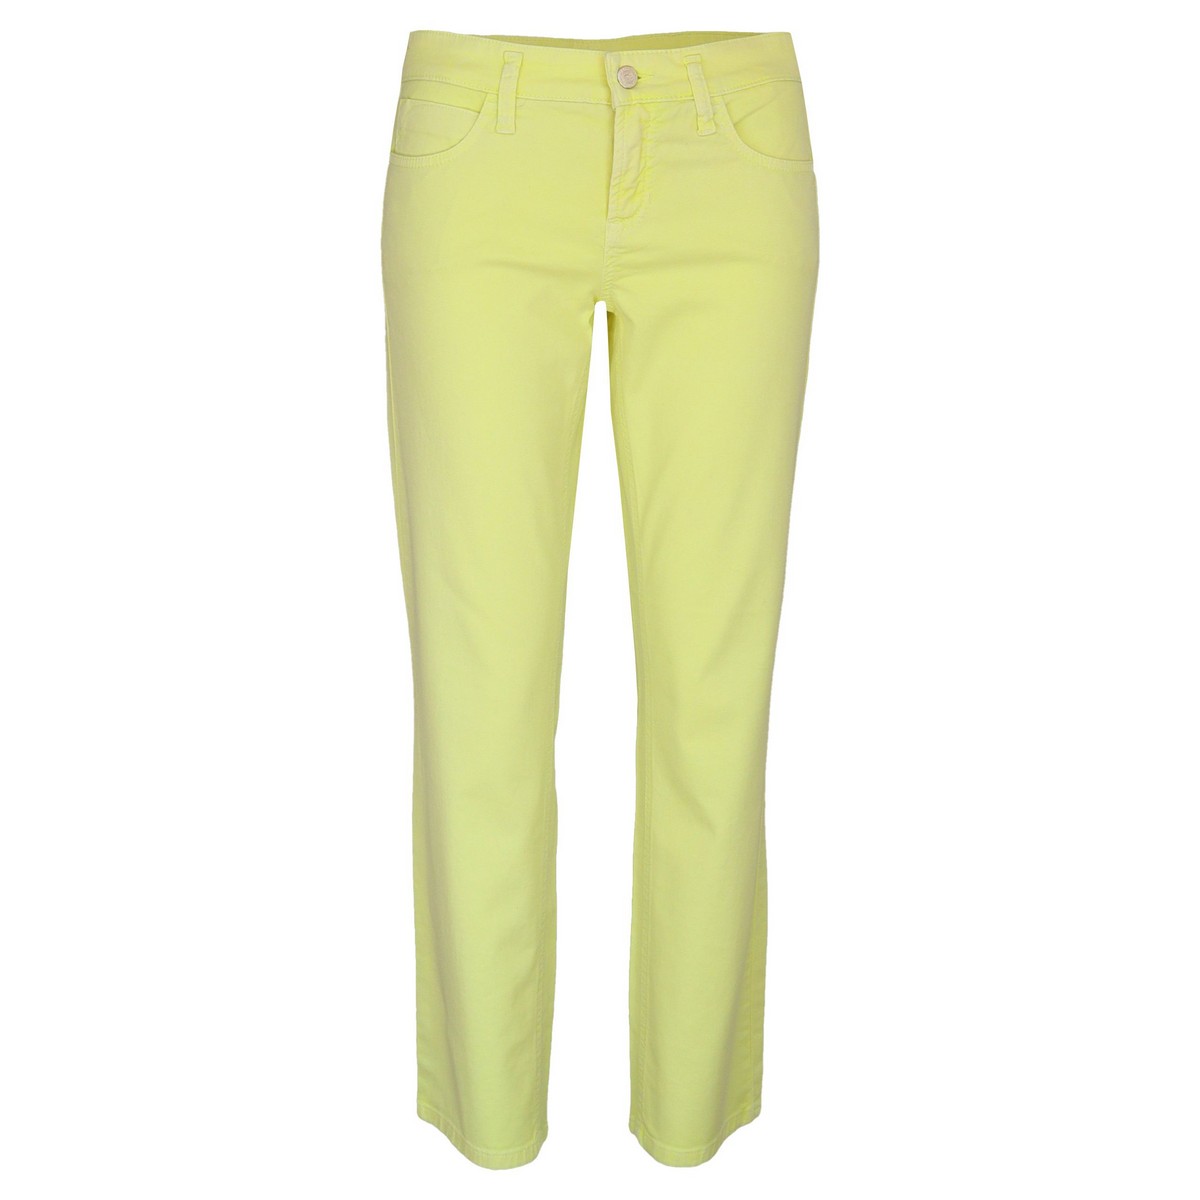 Cambio Sport • gele slim fit jeans met neon • shop BOLLYWOLLY